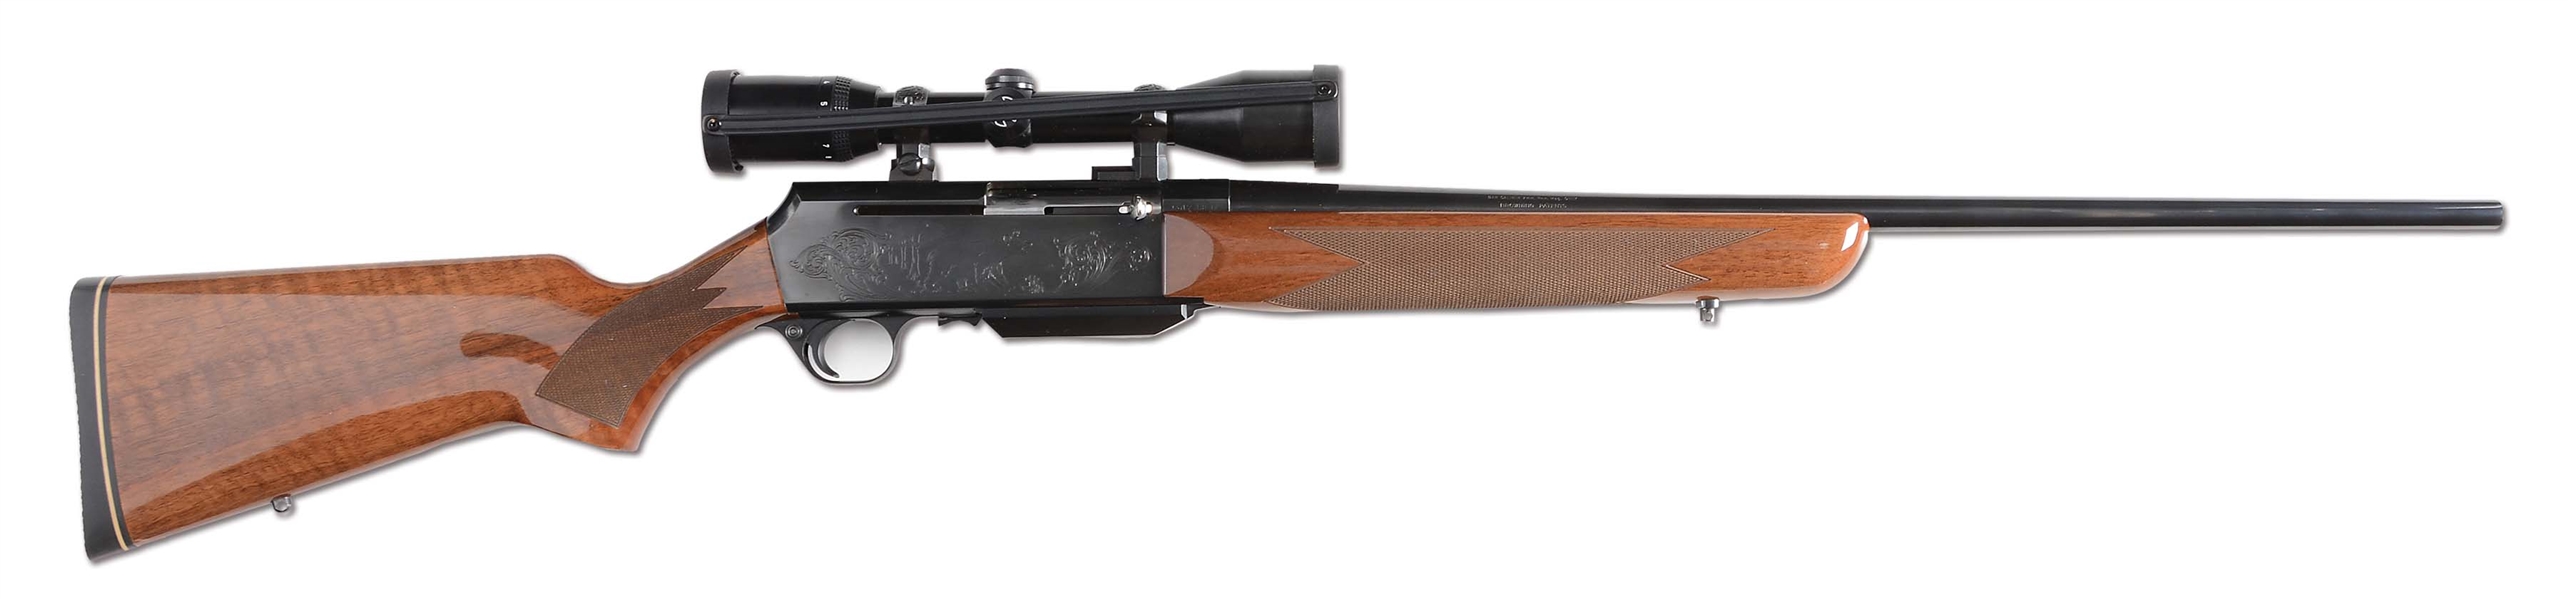 (M) BROWNING BAR IN 7MM REMINGTON MAGNUM WITH ZEISS 3-9X36 DUPLEX SFP SCOPE